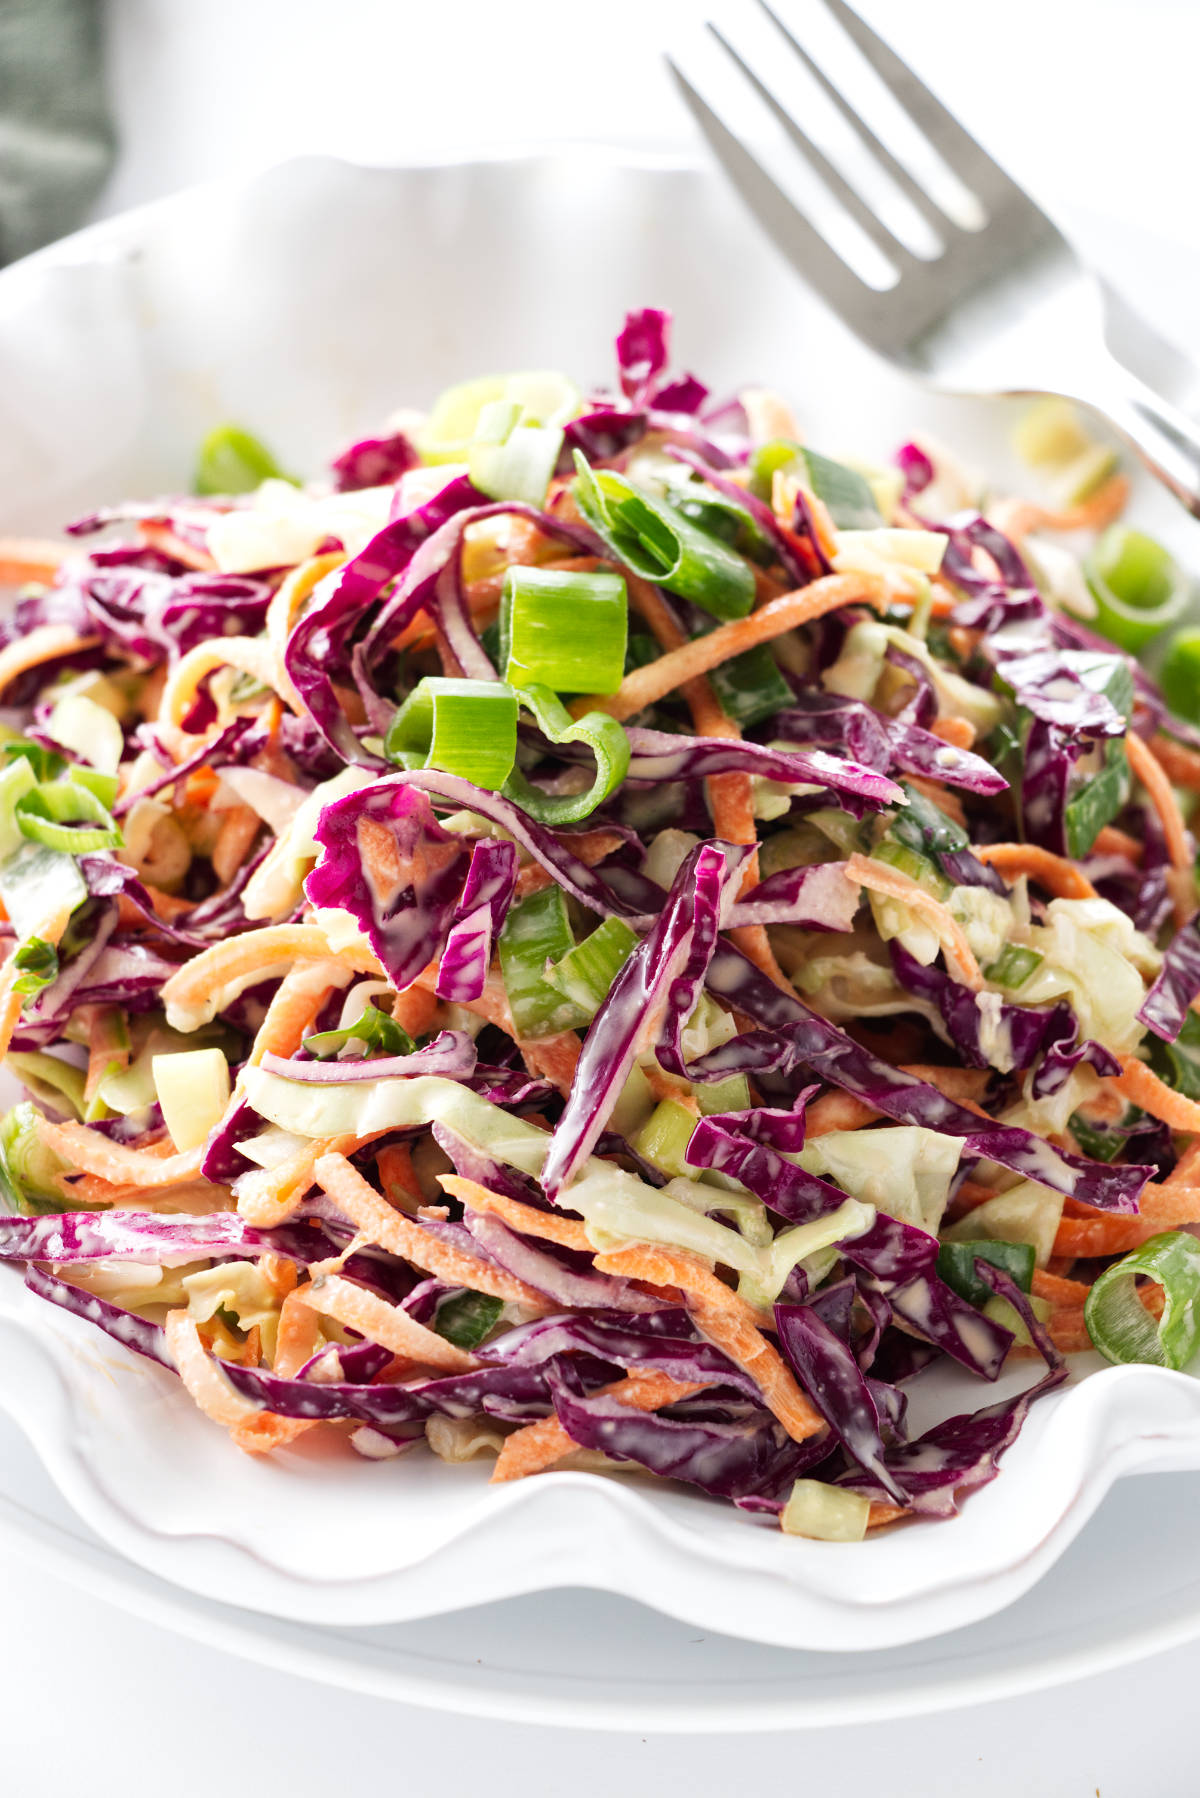 Close up view of a serving of coleslaw